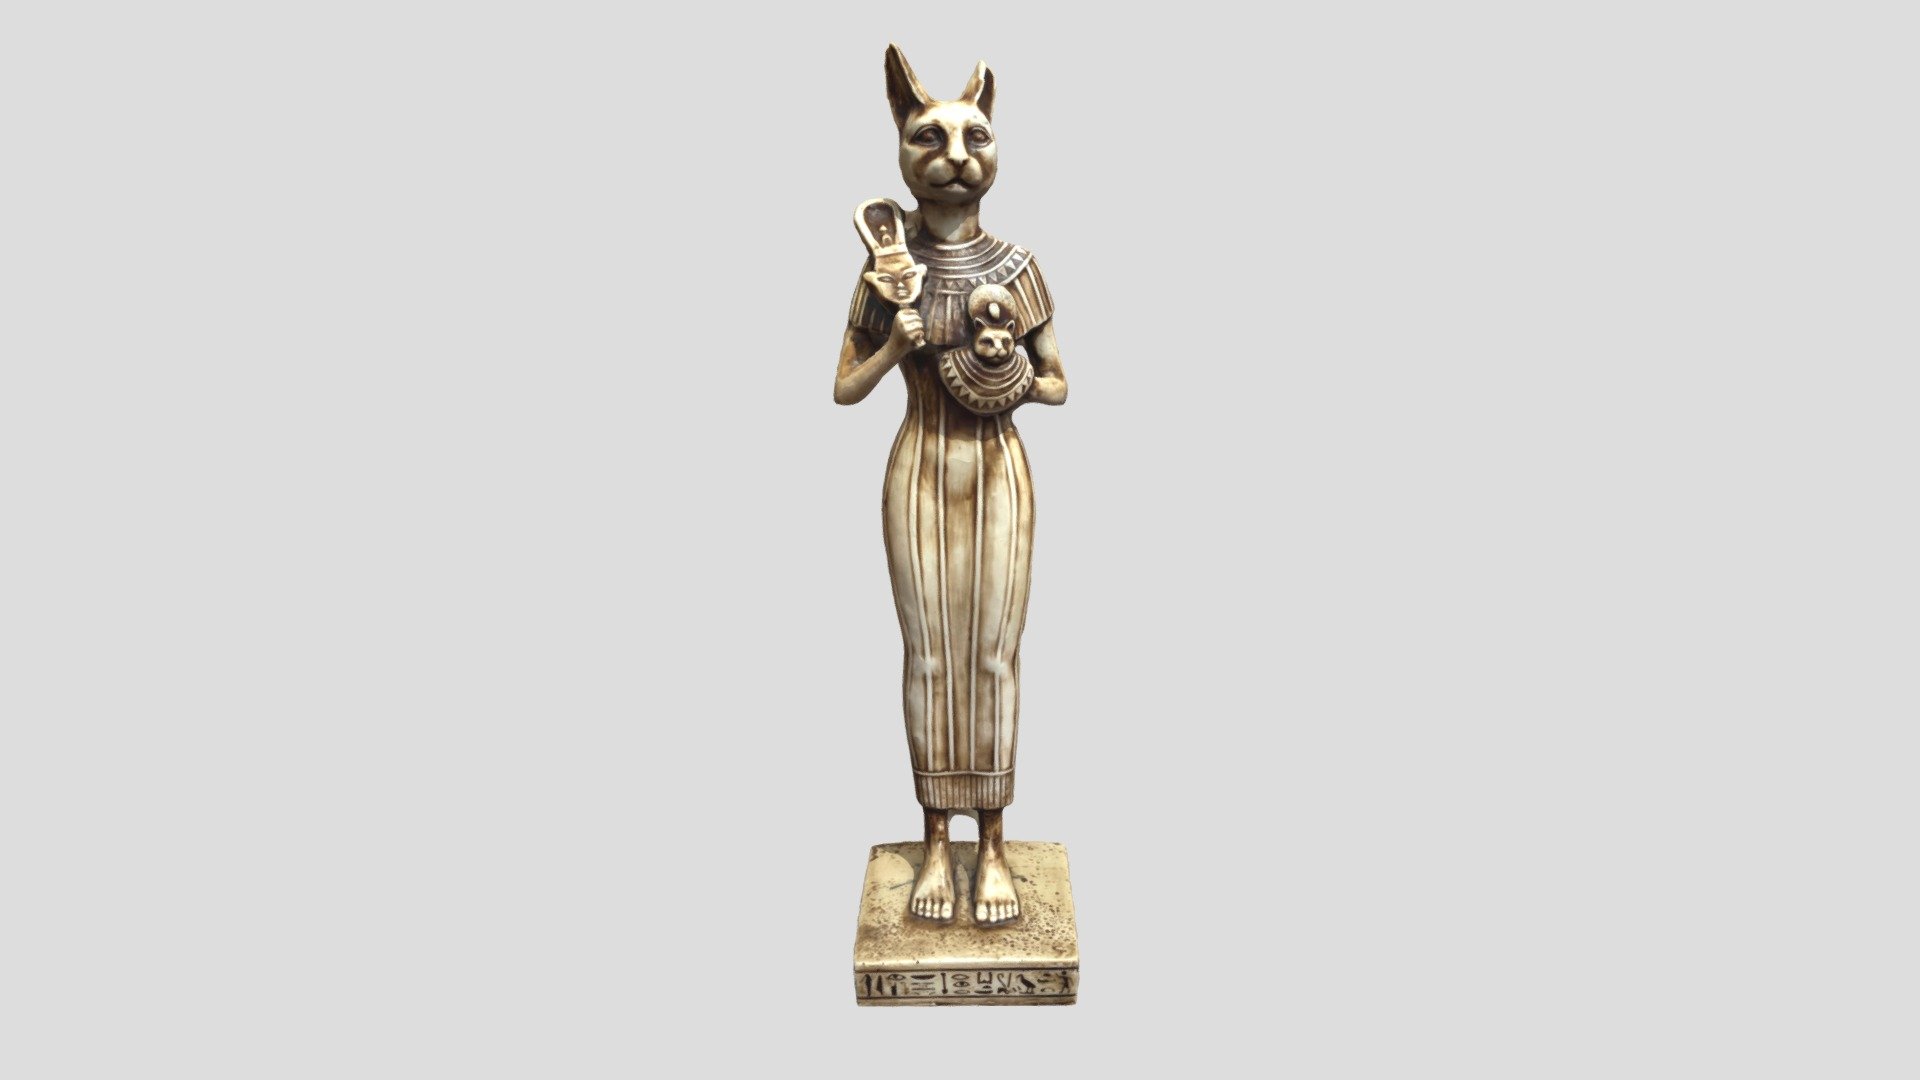 High-quality model of a statue of egyptian goddess Bastet 
• H x W x D = 31 x 8,3 x 7,67 cm
• 45098 triangles
• 26398 vertices
• 44799 faces
• 71021 edges
• .blend format - Statue of Bastet - Download Free 3D model by electricdreams86 3d model